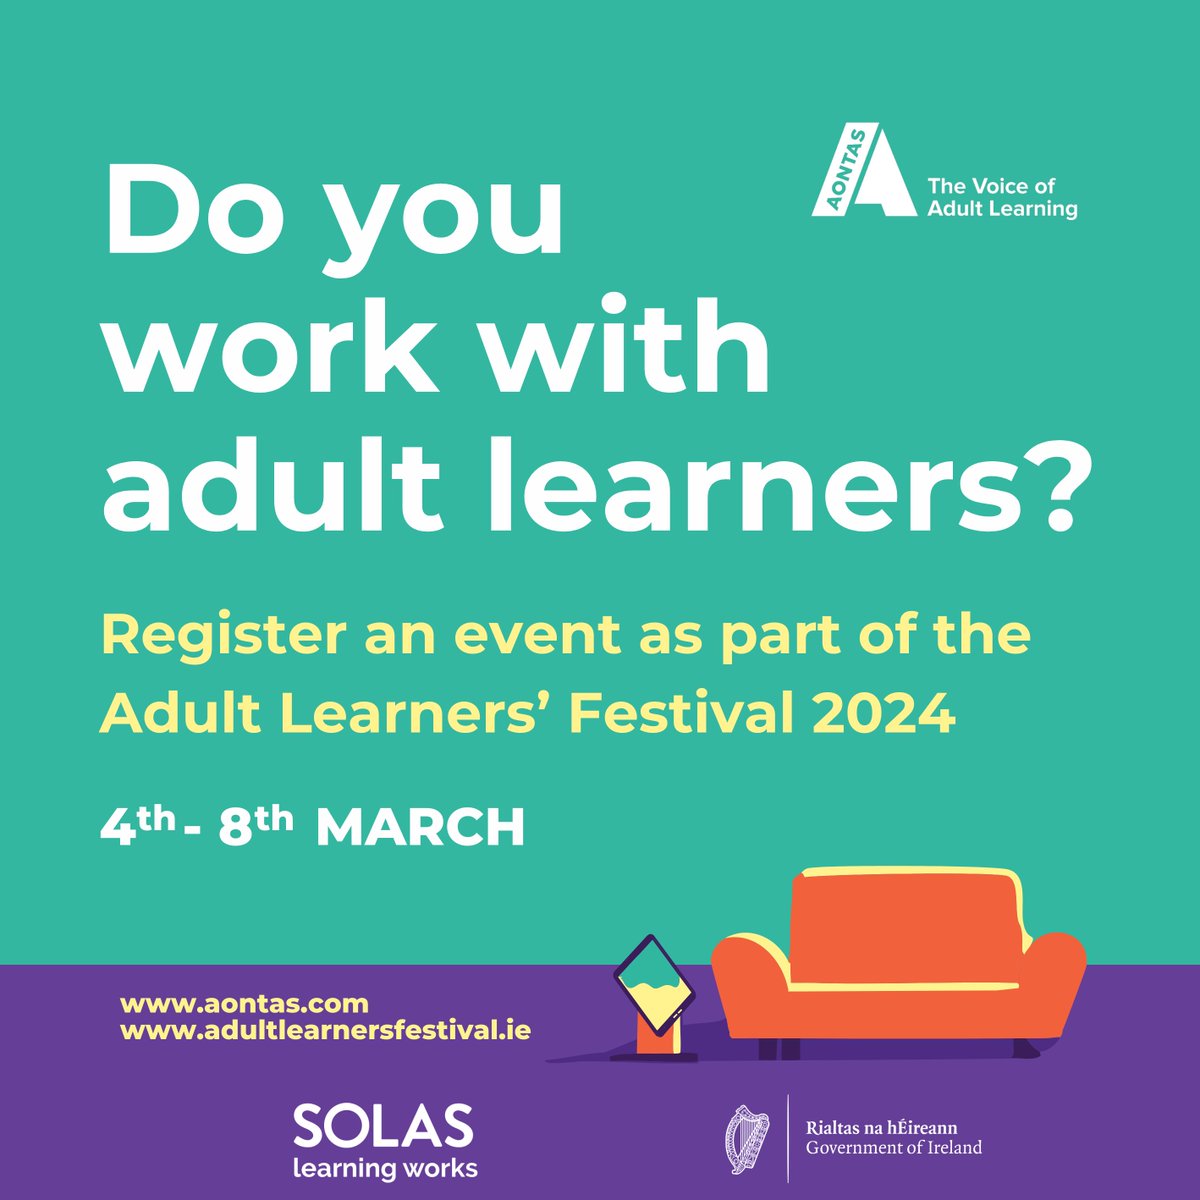 There are still resource packs available for groups submitting events as part of the #ALF24! 🎉 Check out adultlearnersfestival.ie to submit or reach out at ALF@aontas.com if you have questions about crafting your event. #FindYourselfHere